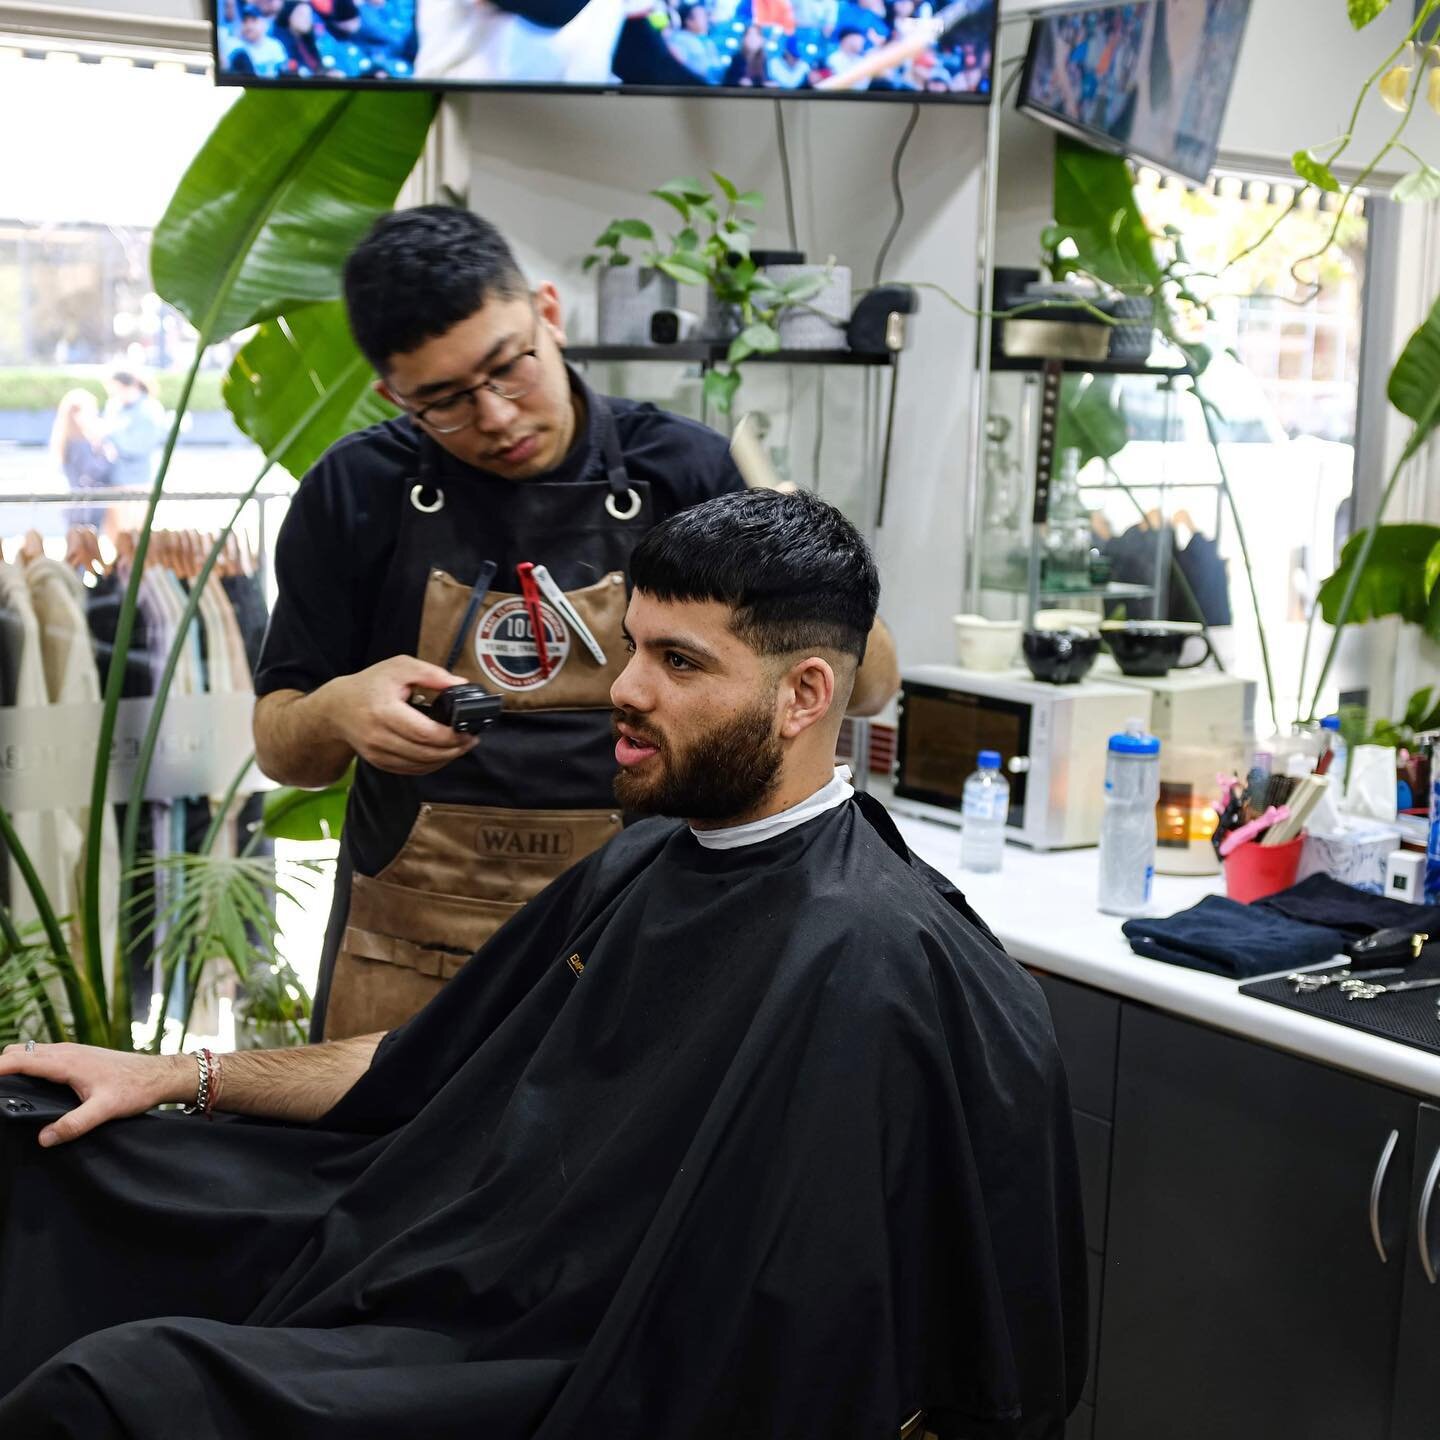 Precision, Perfection and Passion! 

Precision - Our barbers will make sure to provide the EXACT cut you&rsquo;re looking for!

Perfection - Our barbers are nothing short of perfection! 

Passion - Our barbers LOVE what they do and would not trade it